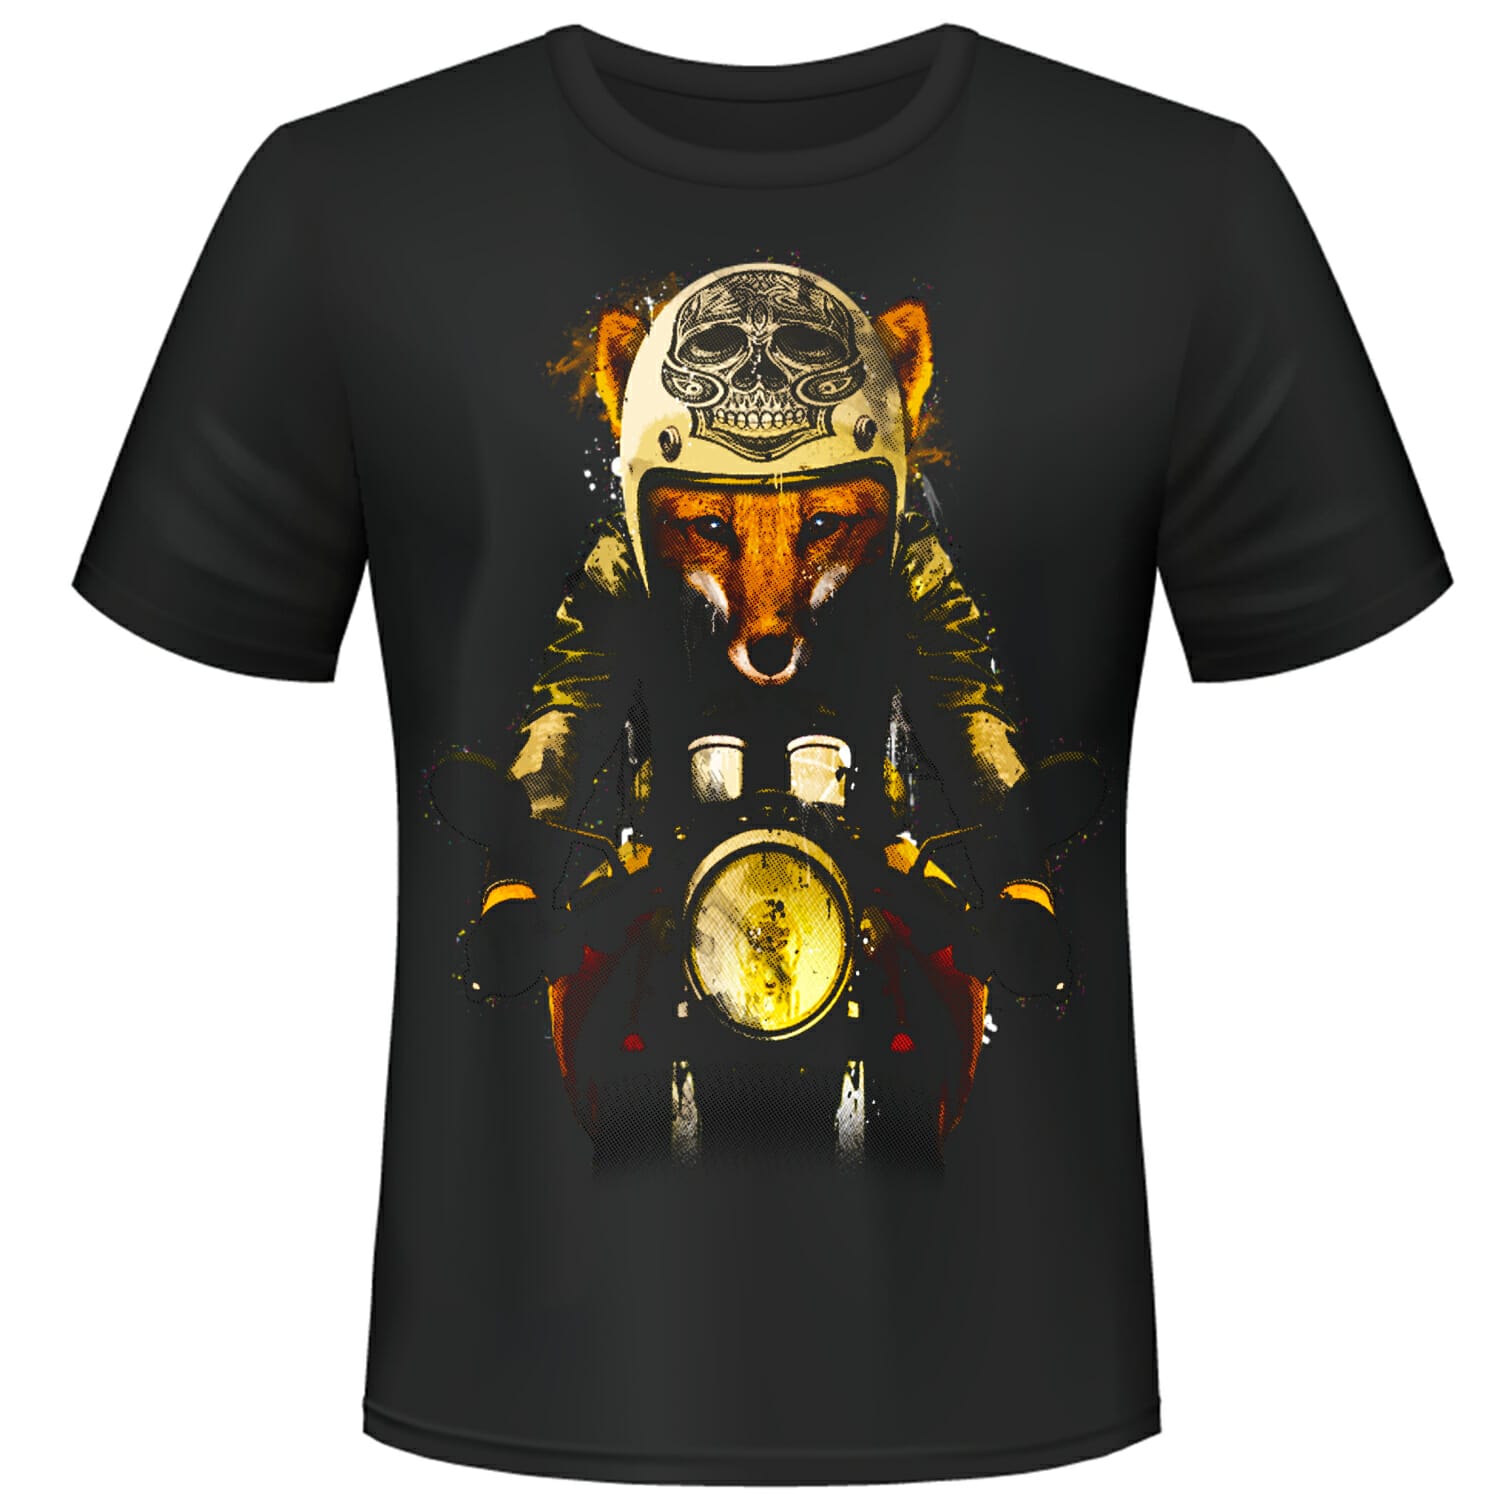 Get the unique 'Fox Riding A Motorbike' Halftone Free T-shirt Design – a perfect blend of wildlife and adventure for your wardrobe!